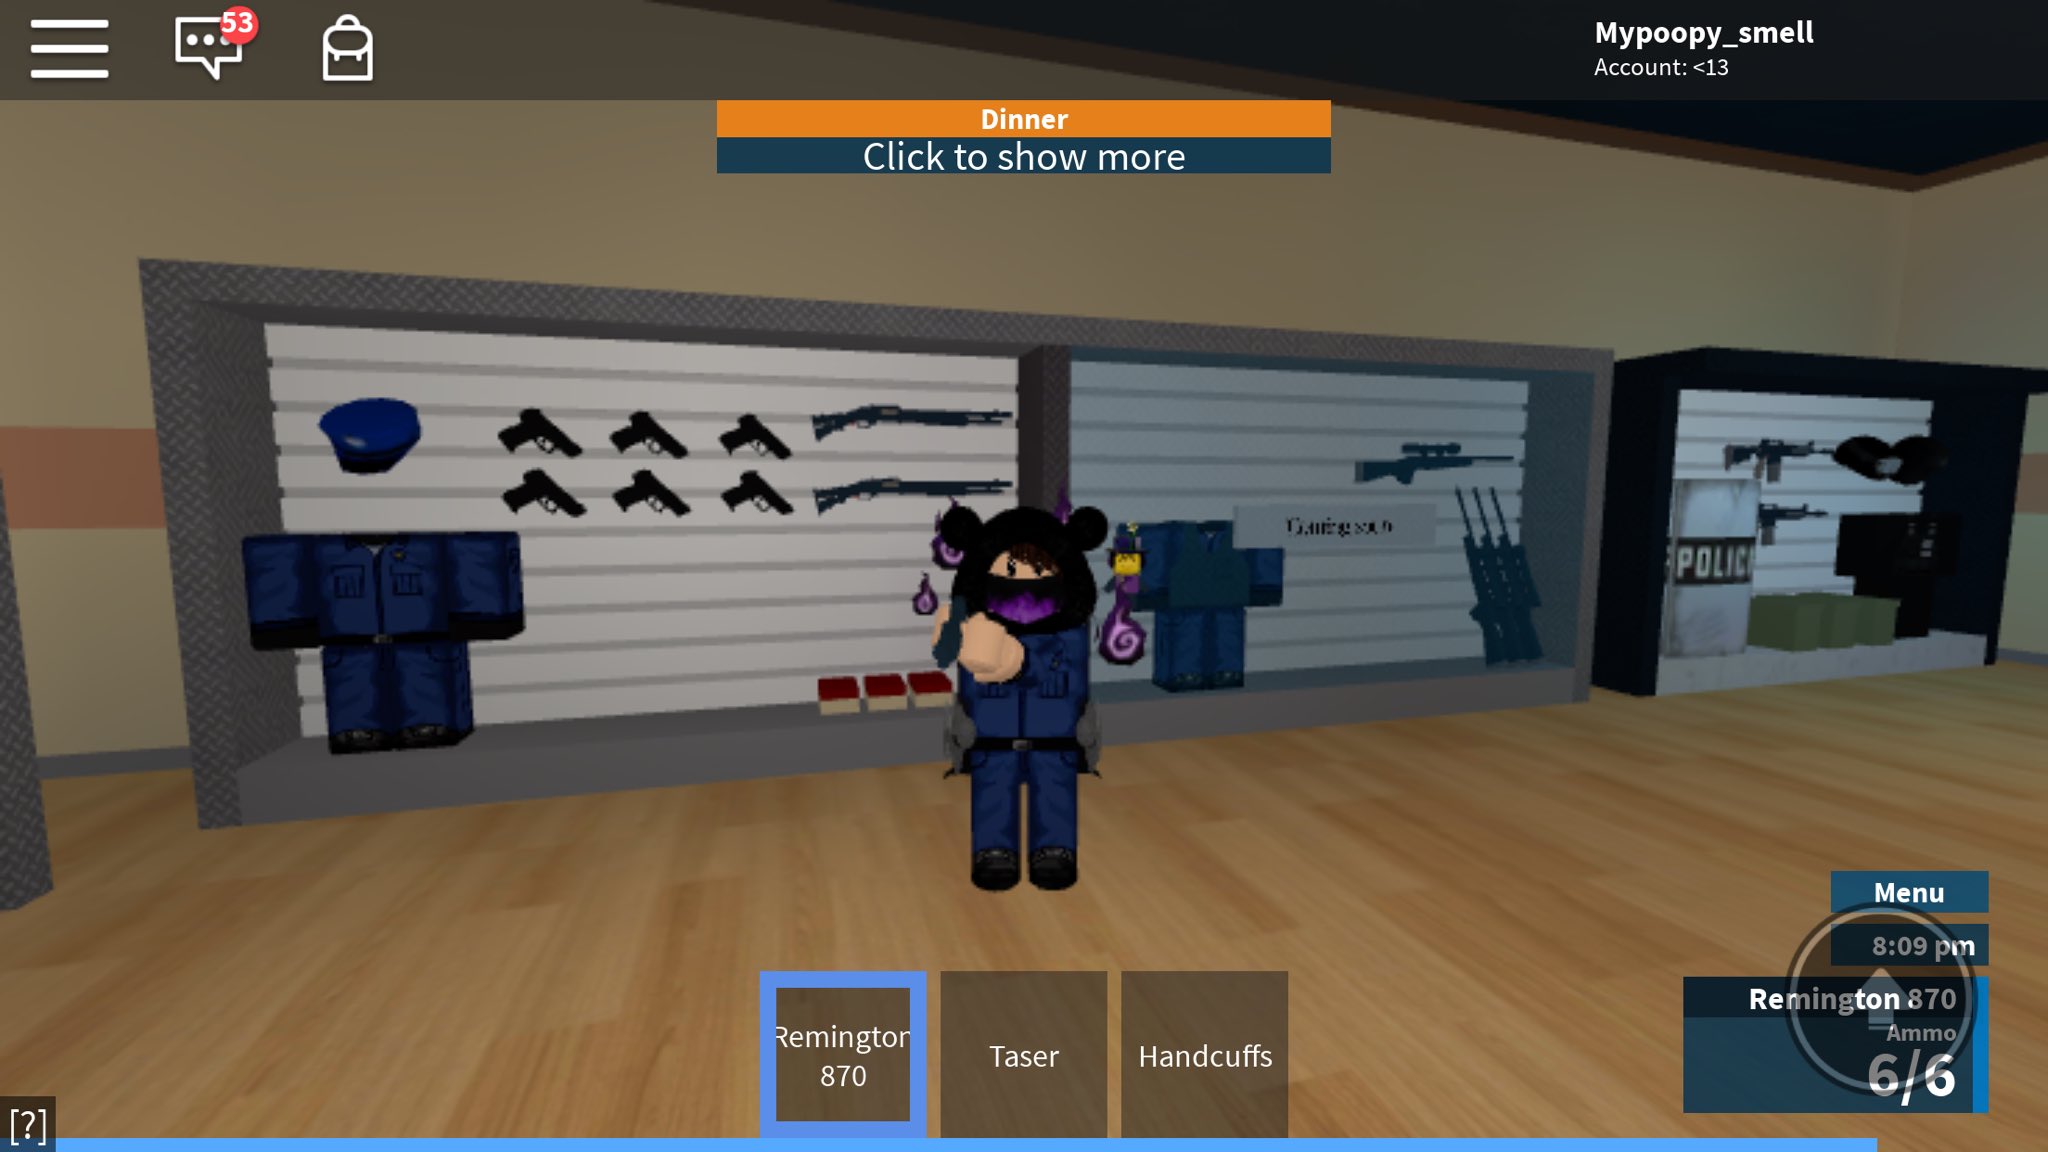 Nobie6666 On Twitter I Played The Og Prison Game On Roblox Prison Life Any Of You Og S Still Play This - pirson life 2.1 roblox